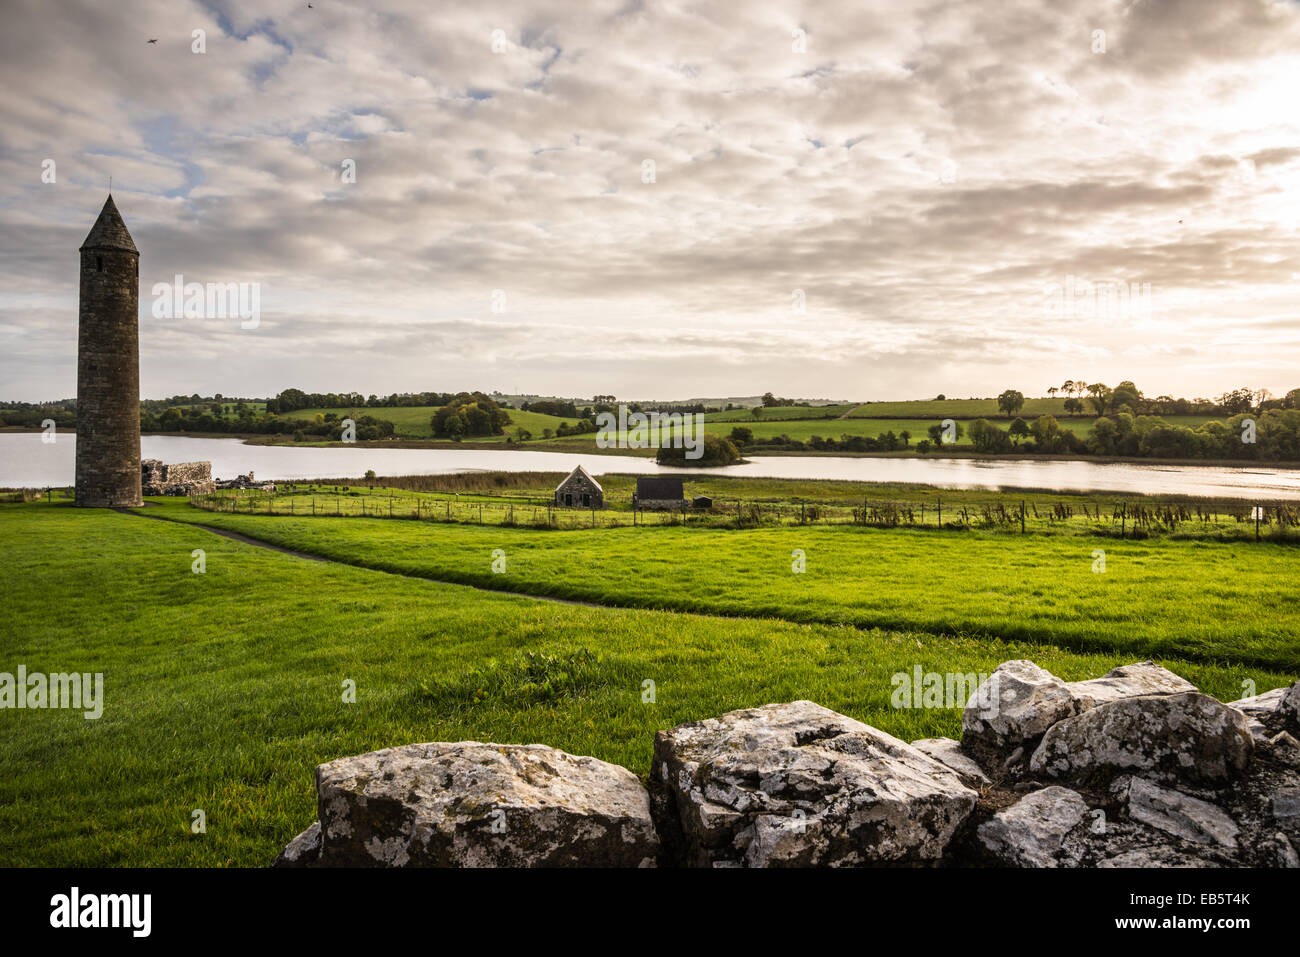 Round Tower, St Mary's Augustinian Priory, Devenish Island, County Fermanagh, Northern Ireland. Stock Photo